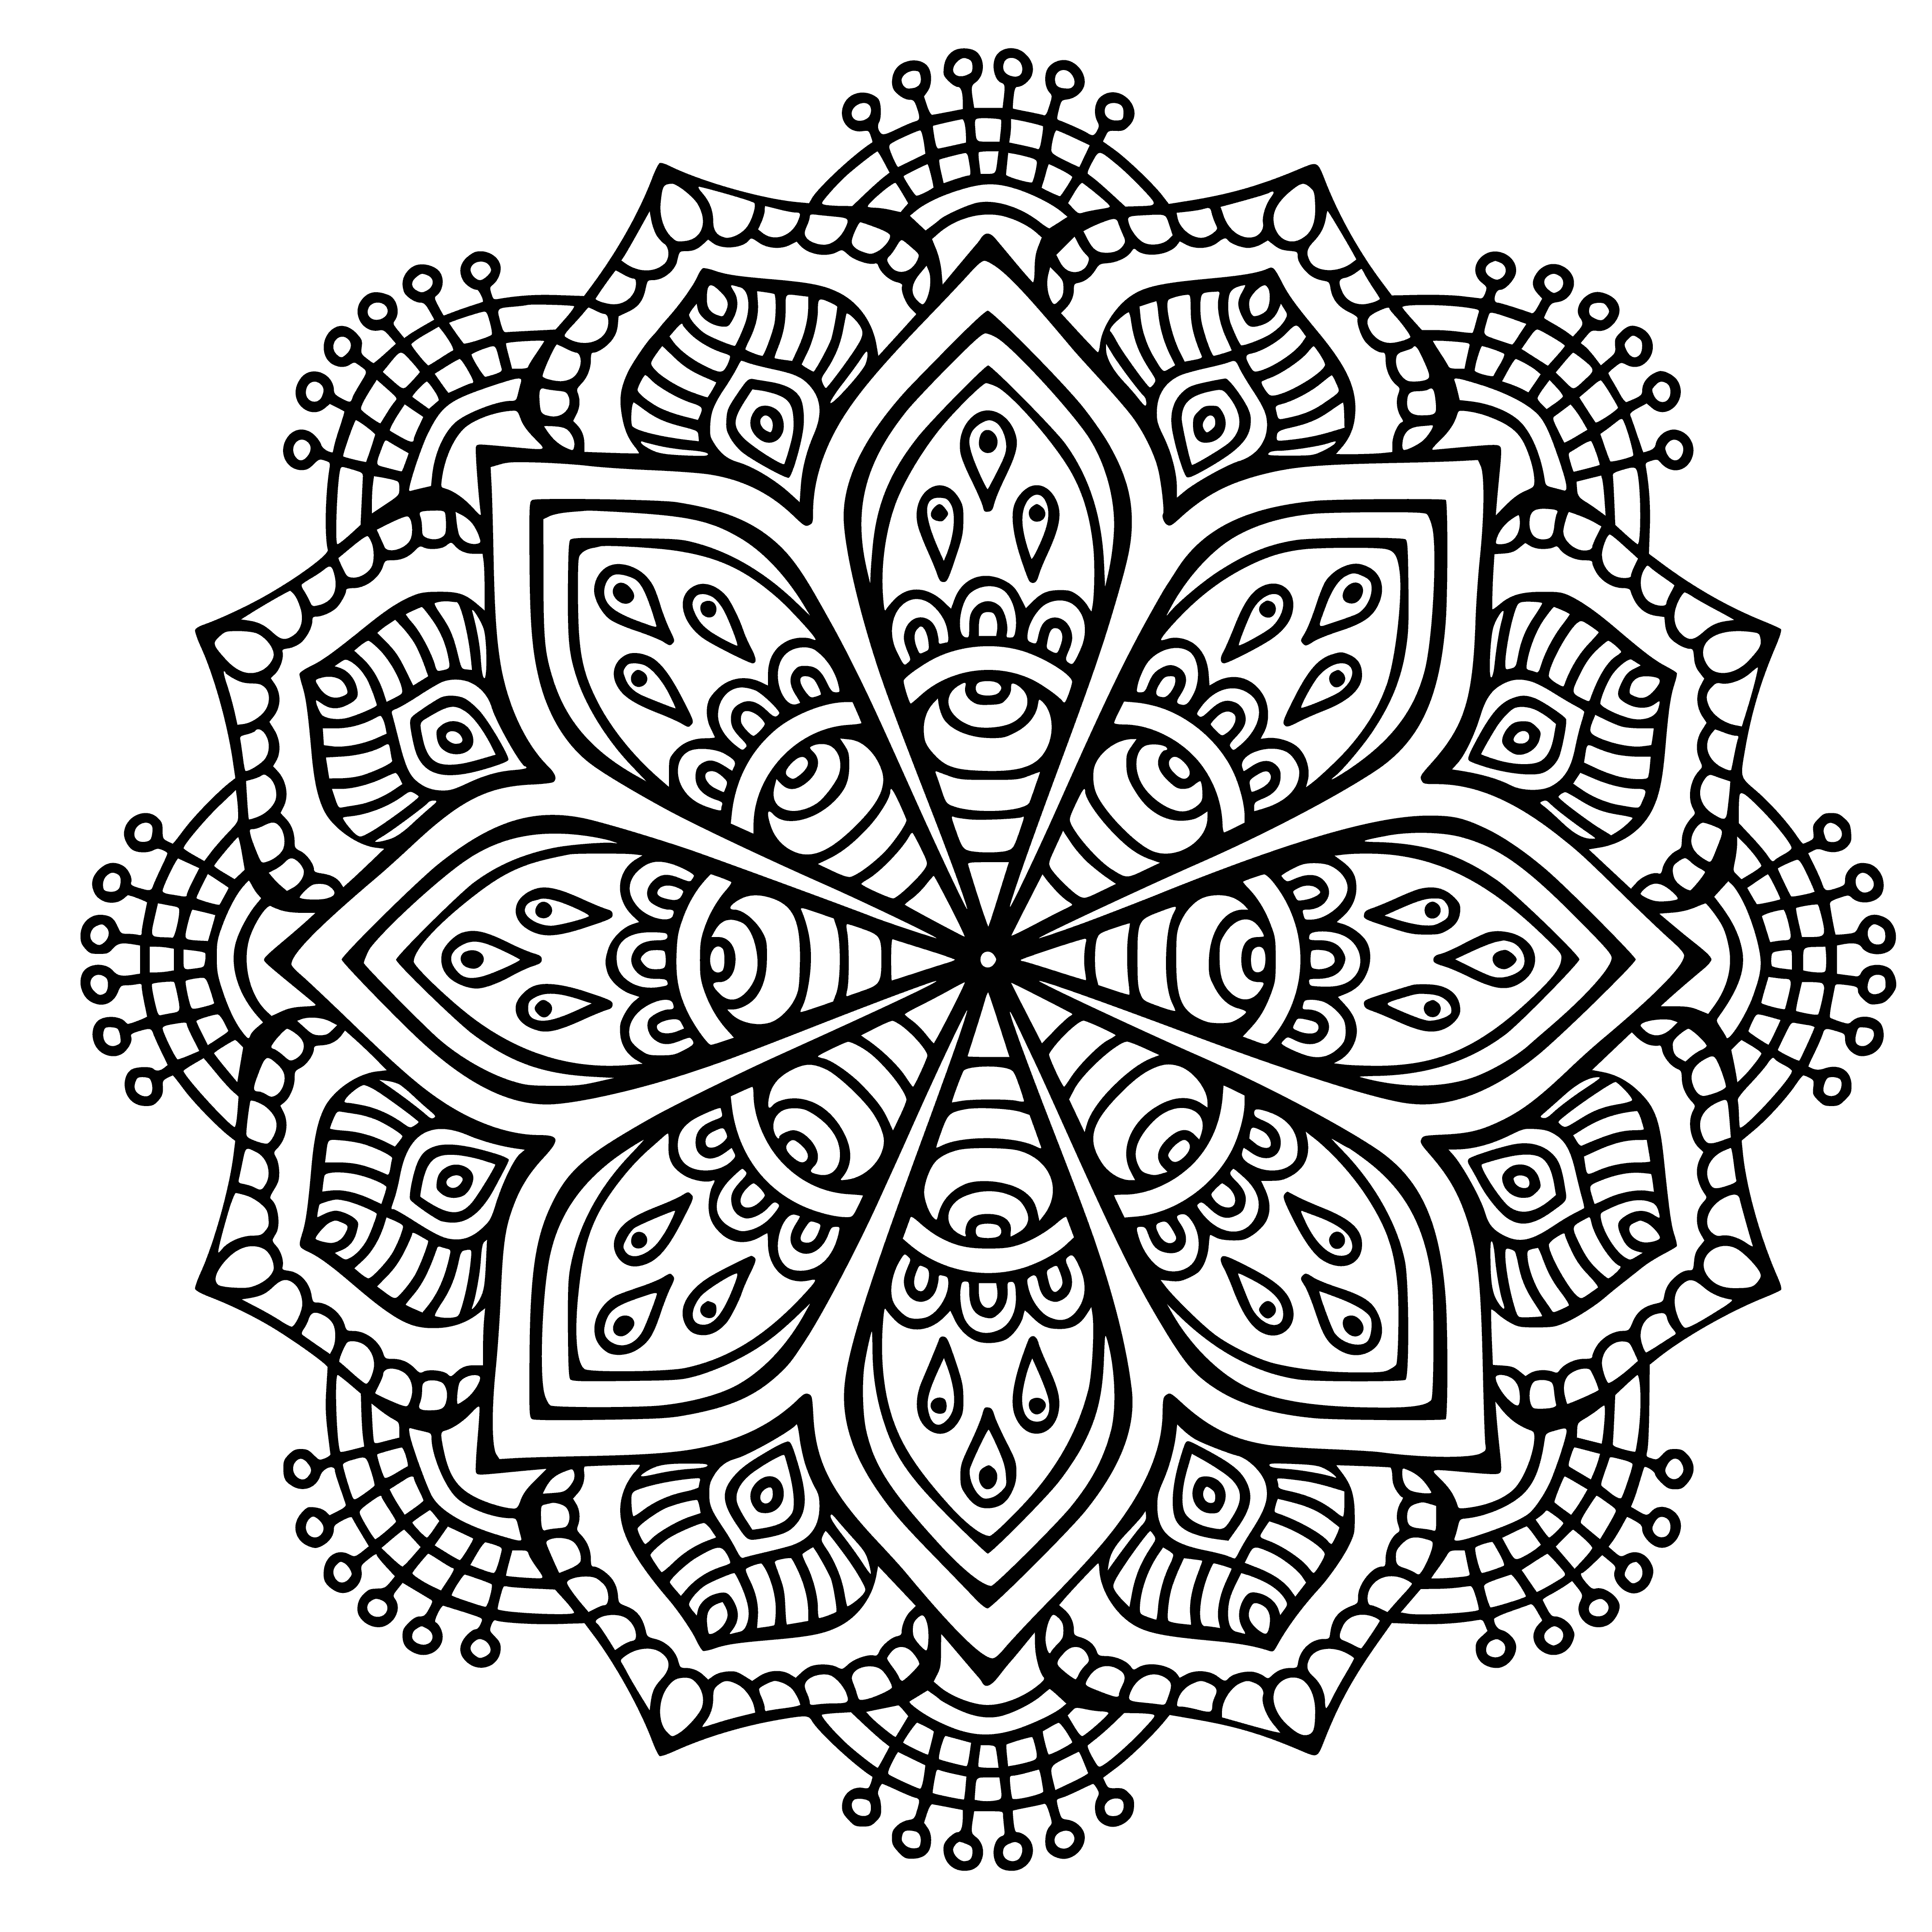 coloring page: Circular design of intricately patterned colors and shapes radiating from a center point.